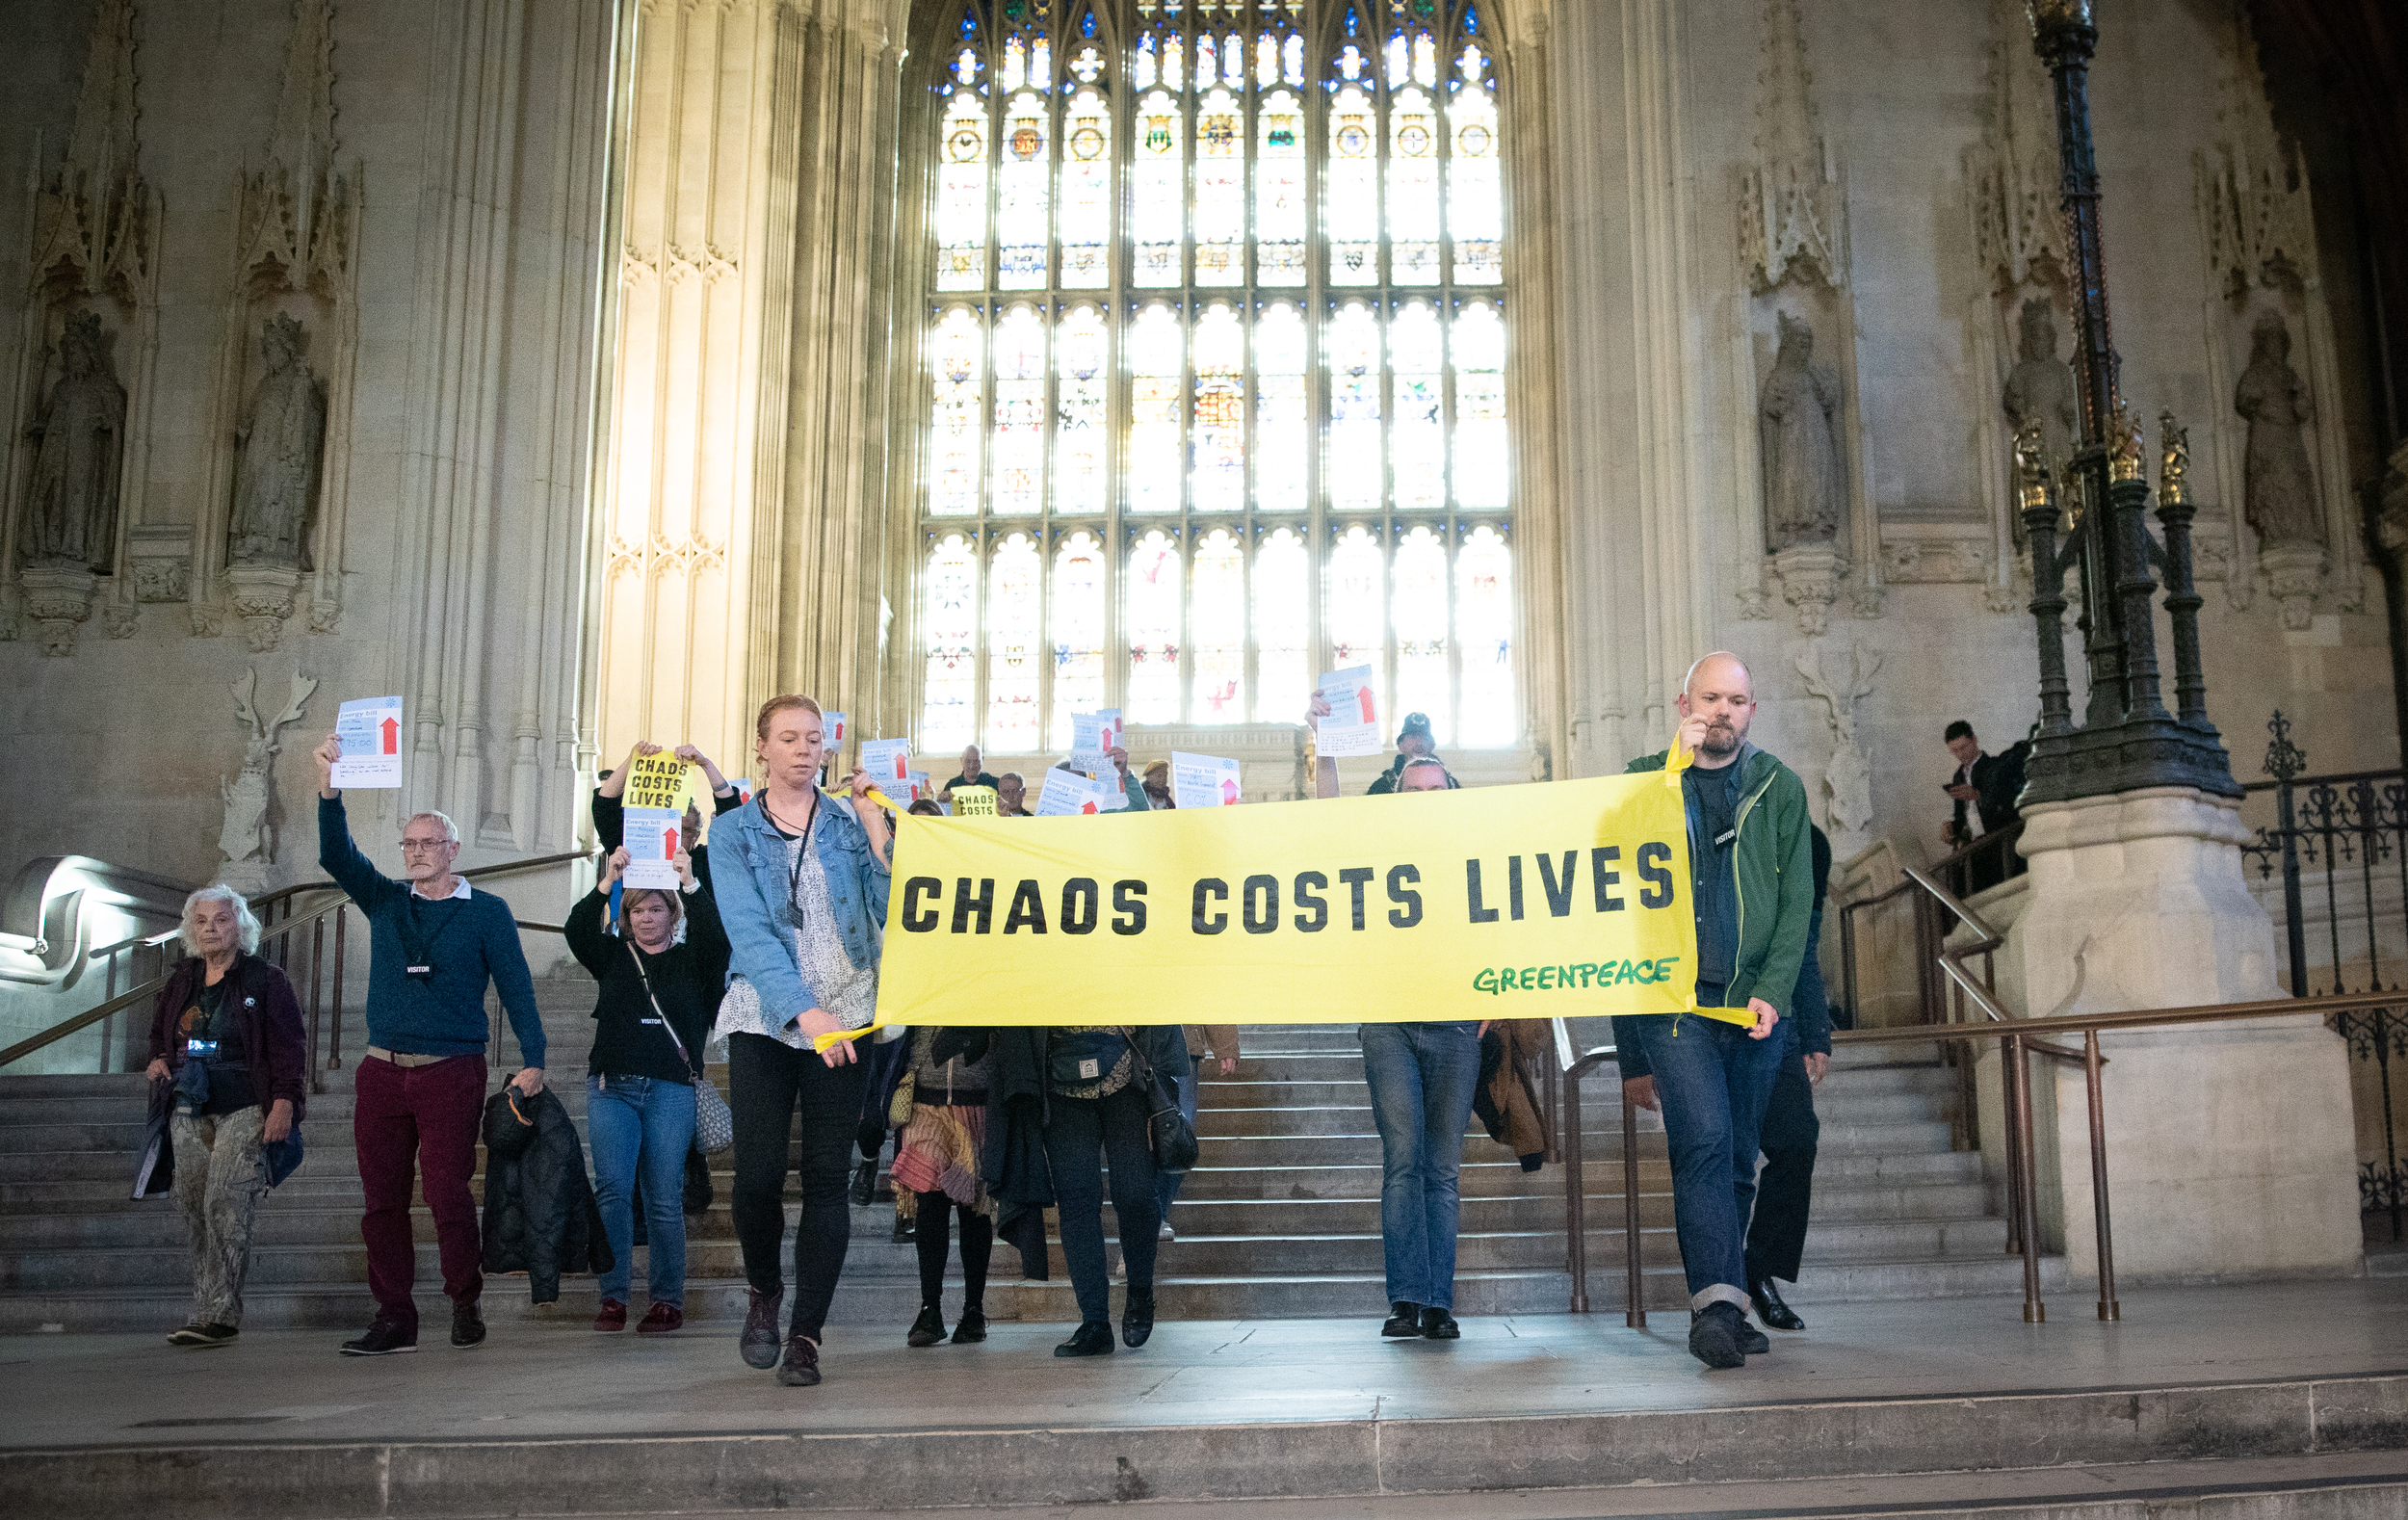 Group of activists hold a banner reading 'Chaos costs lives' in front of an elaborate stained glass window in the Palace of Westminster